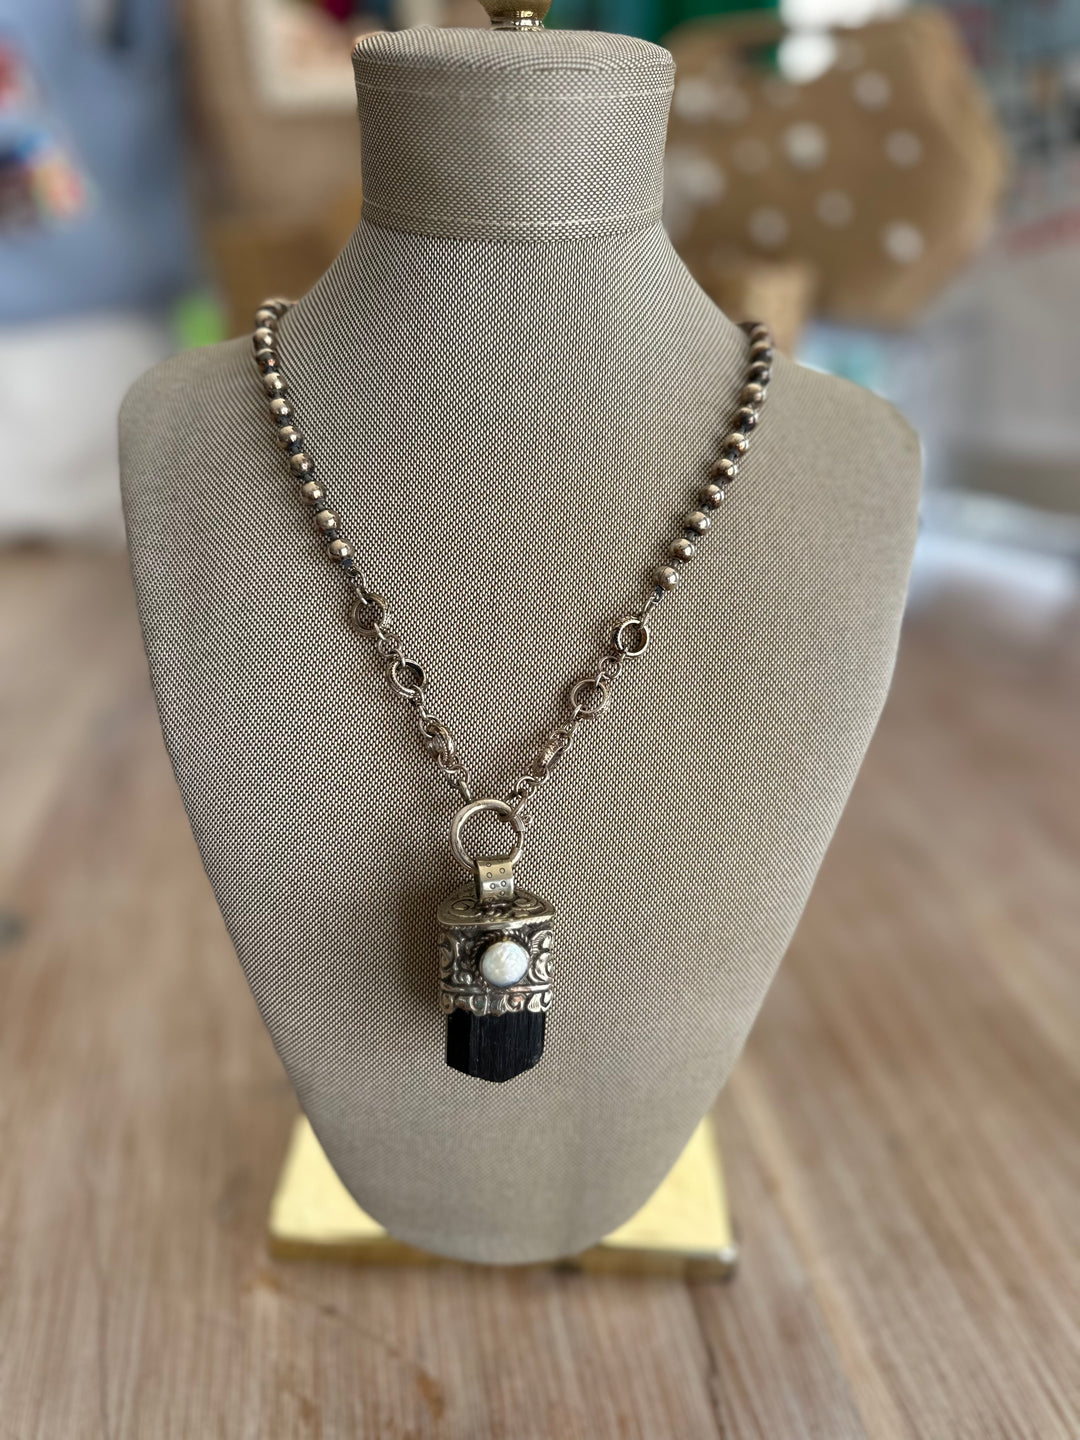 Vintage Sterling Plated Chain With Black Tourmaline Pendant-Accessories-Erin Knight Designs-Shop with Bloom West Boutique, Women's Fashion Boutique, Located in Houma, Louisiana